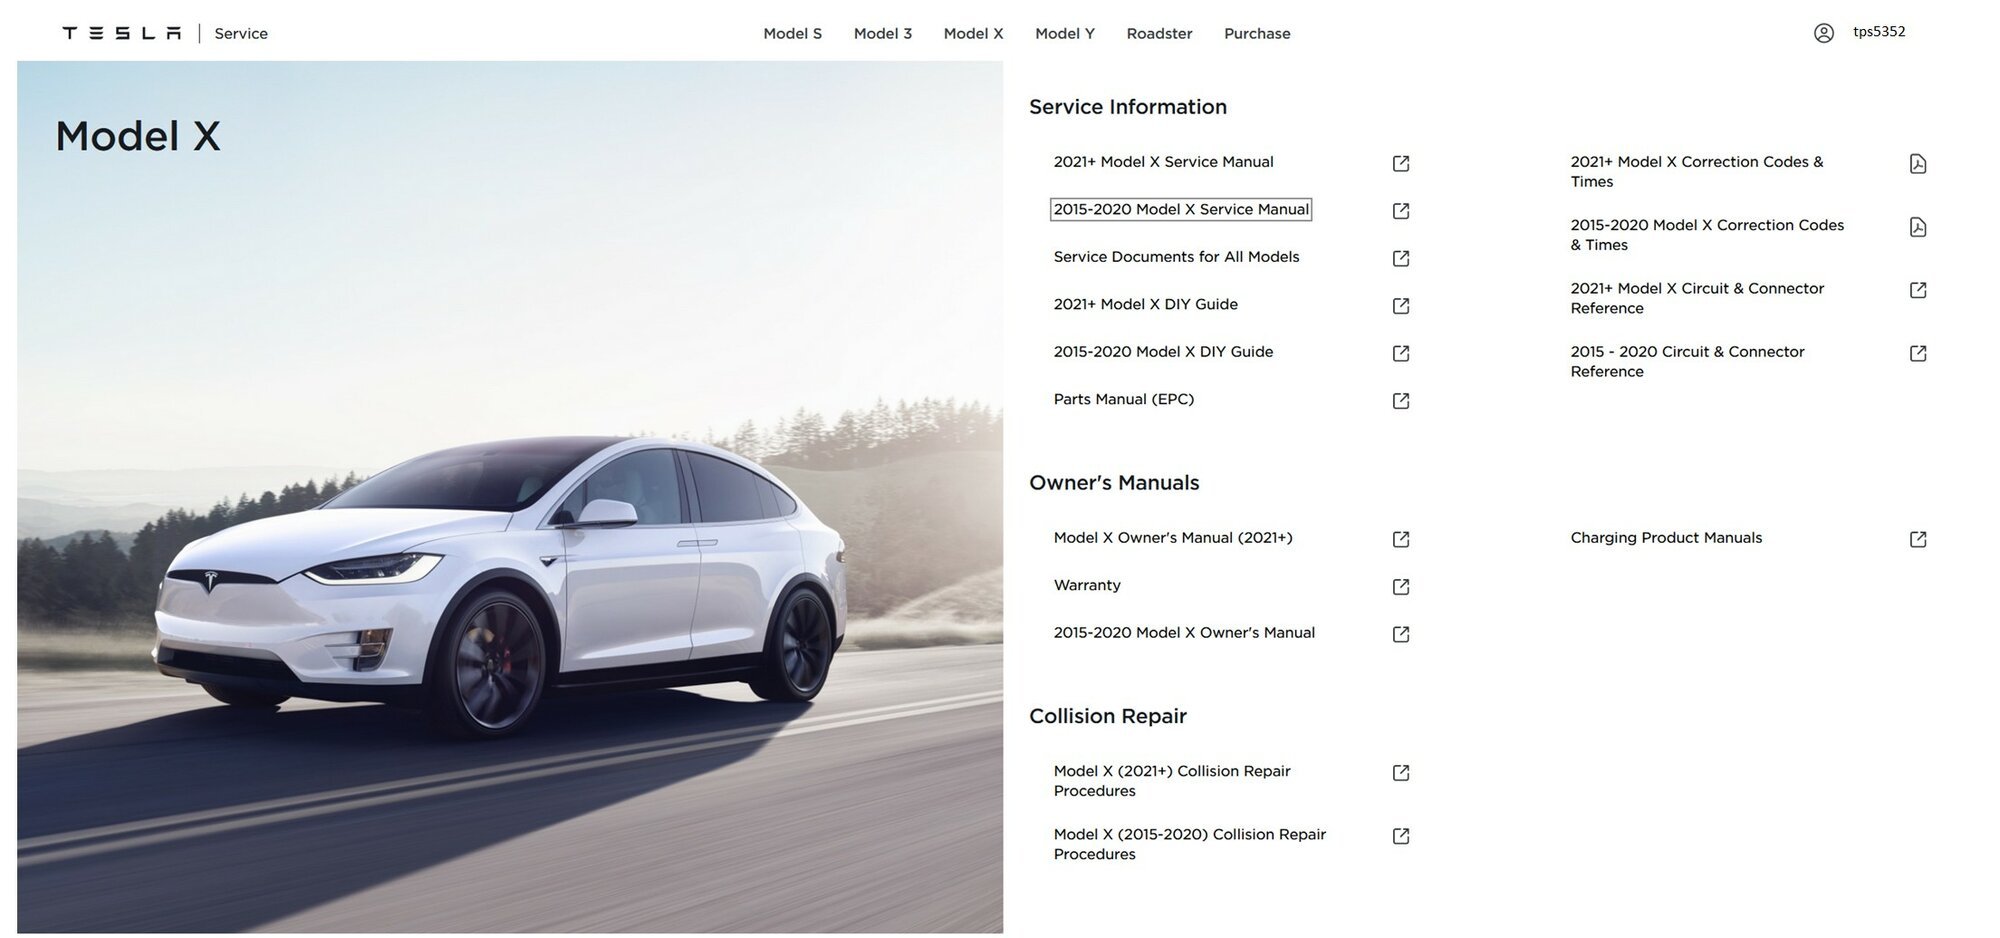 Classic Model X Online Service - Main Contents Page